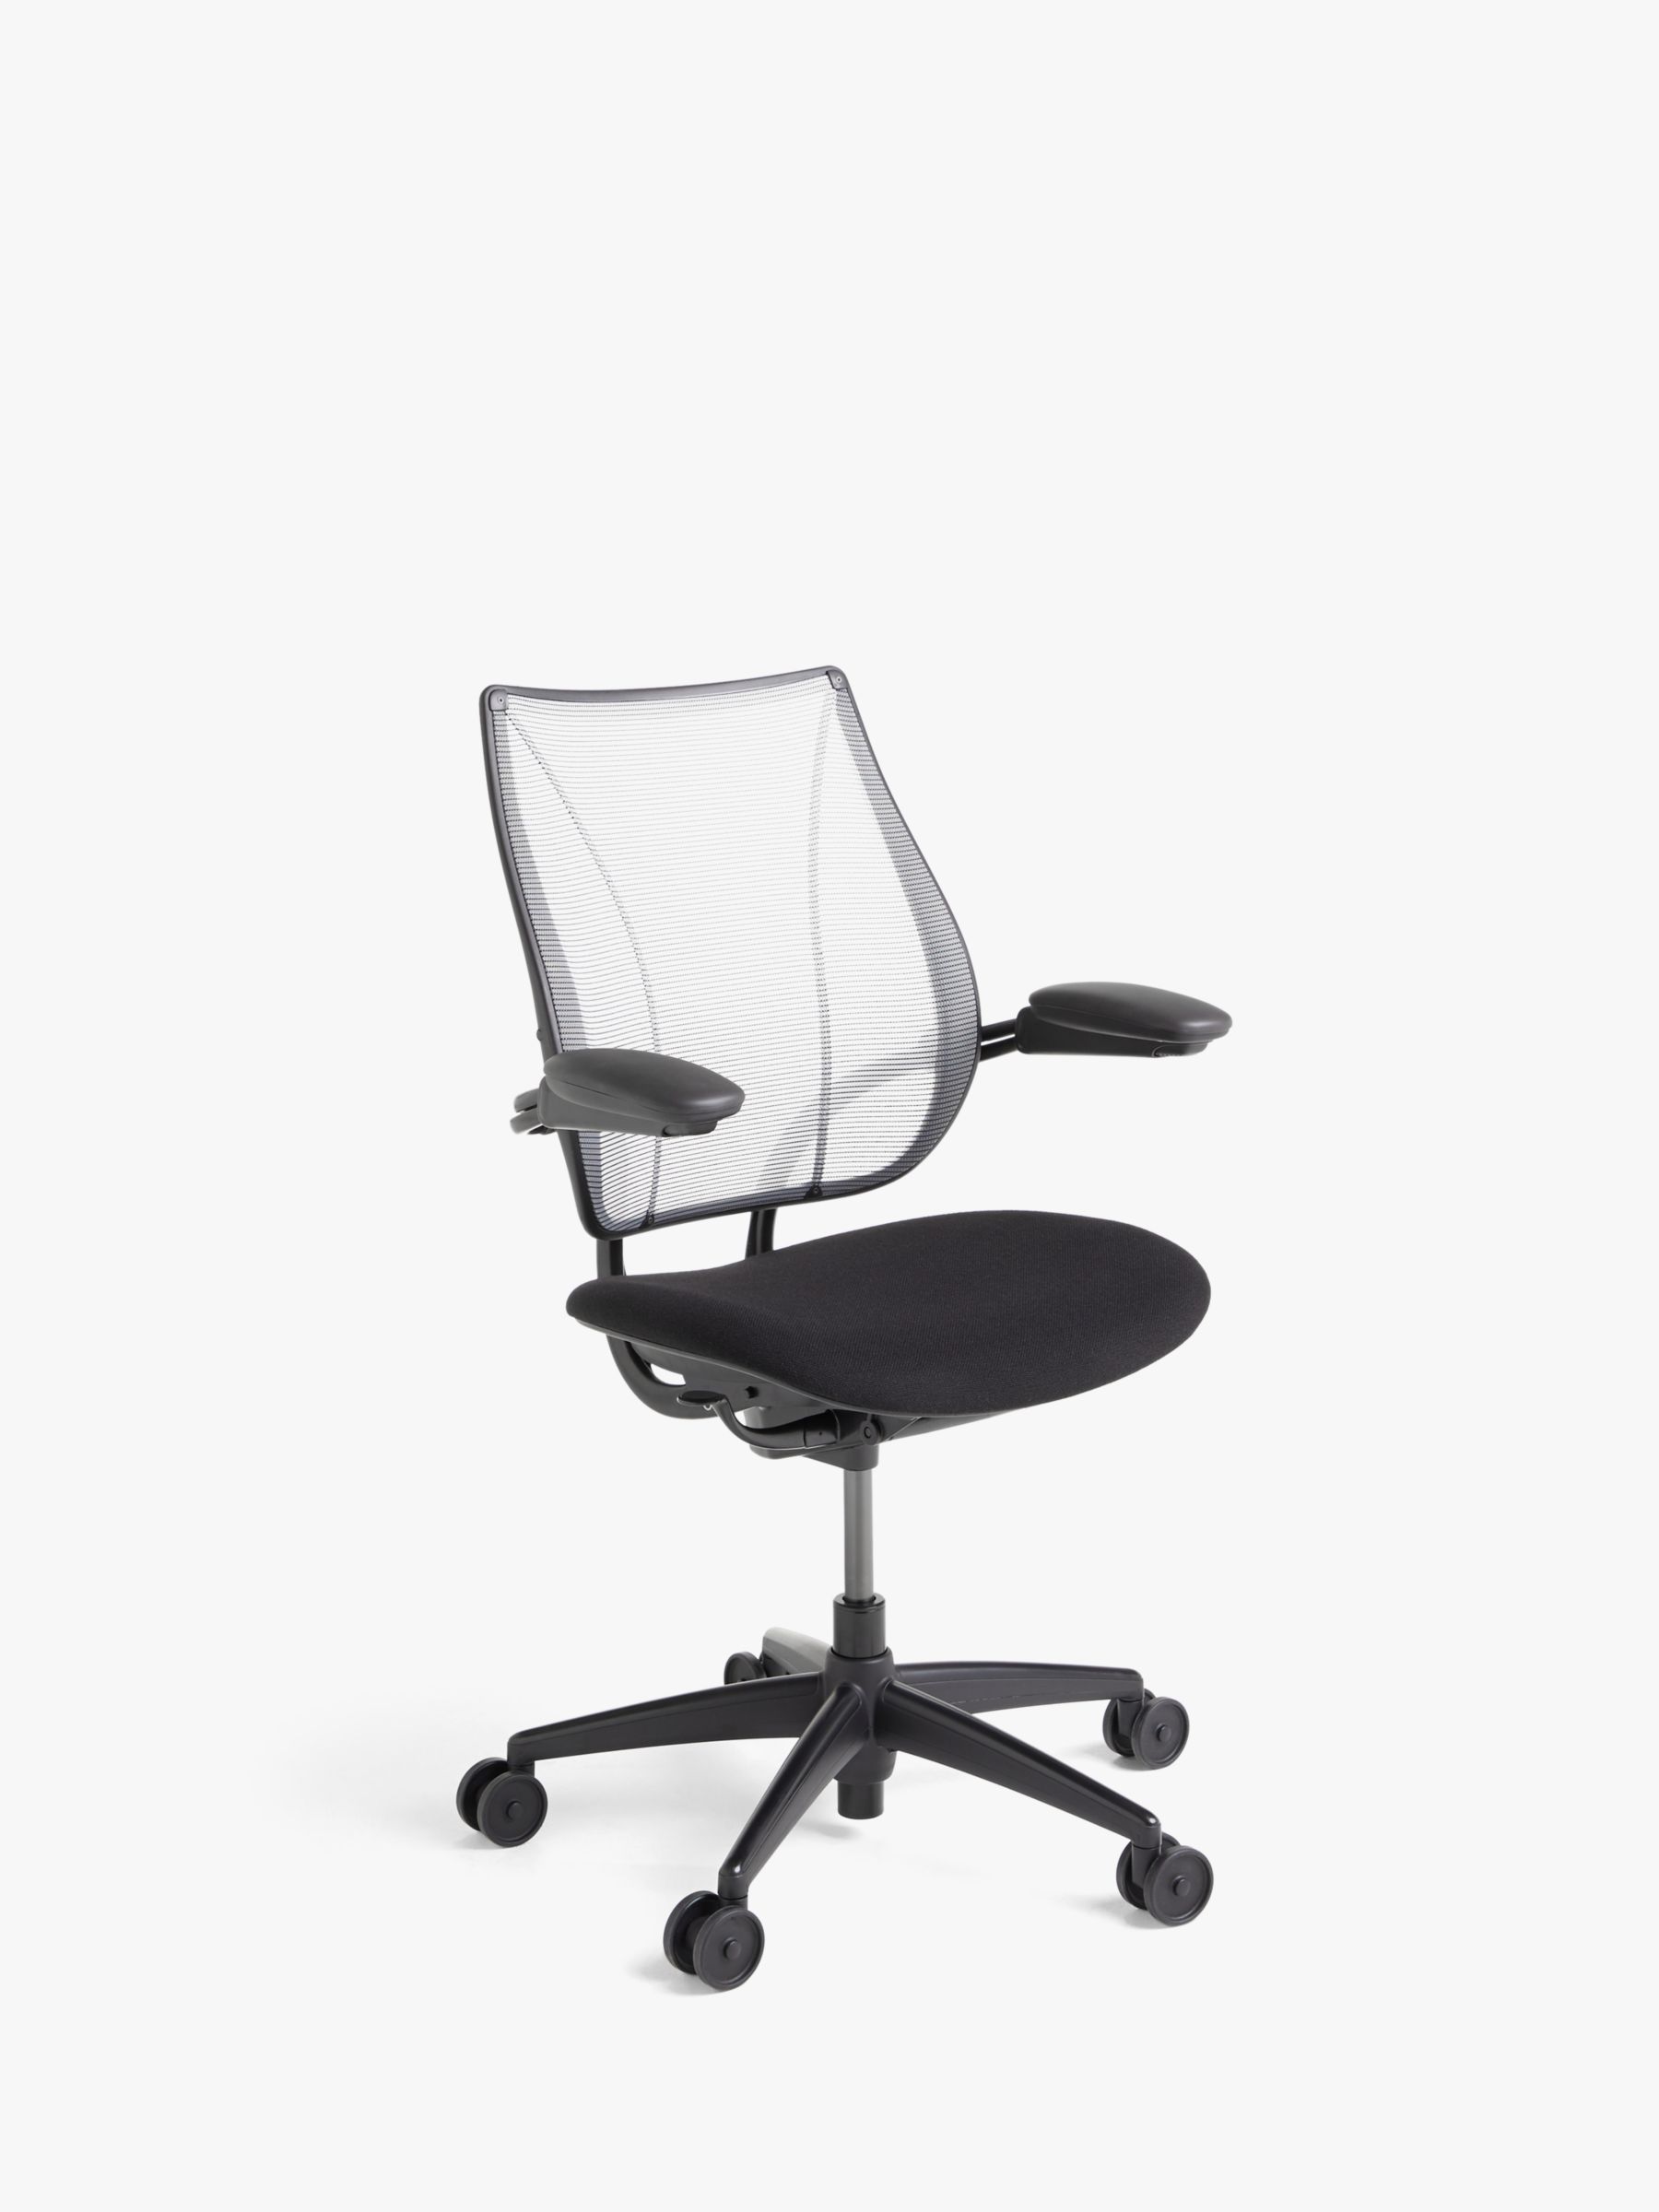 Photo of Humanscale liberty office chair